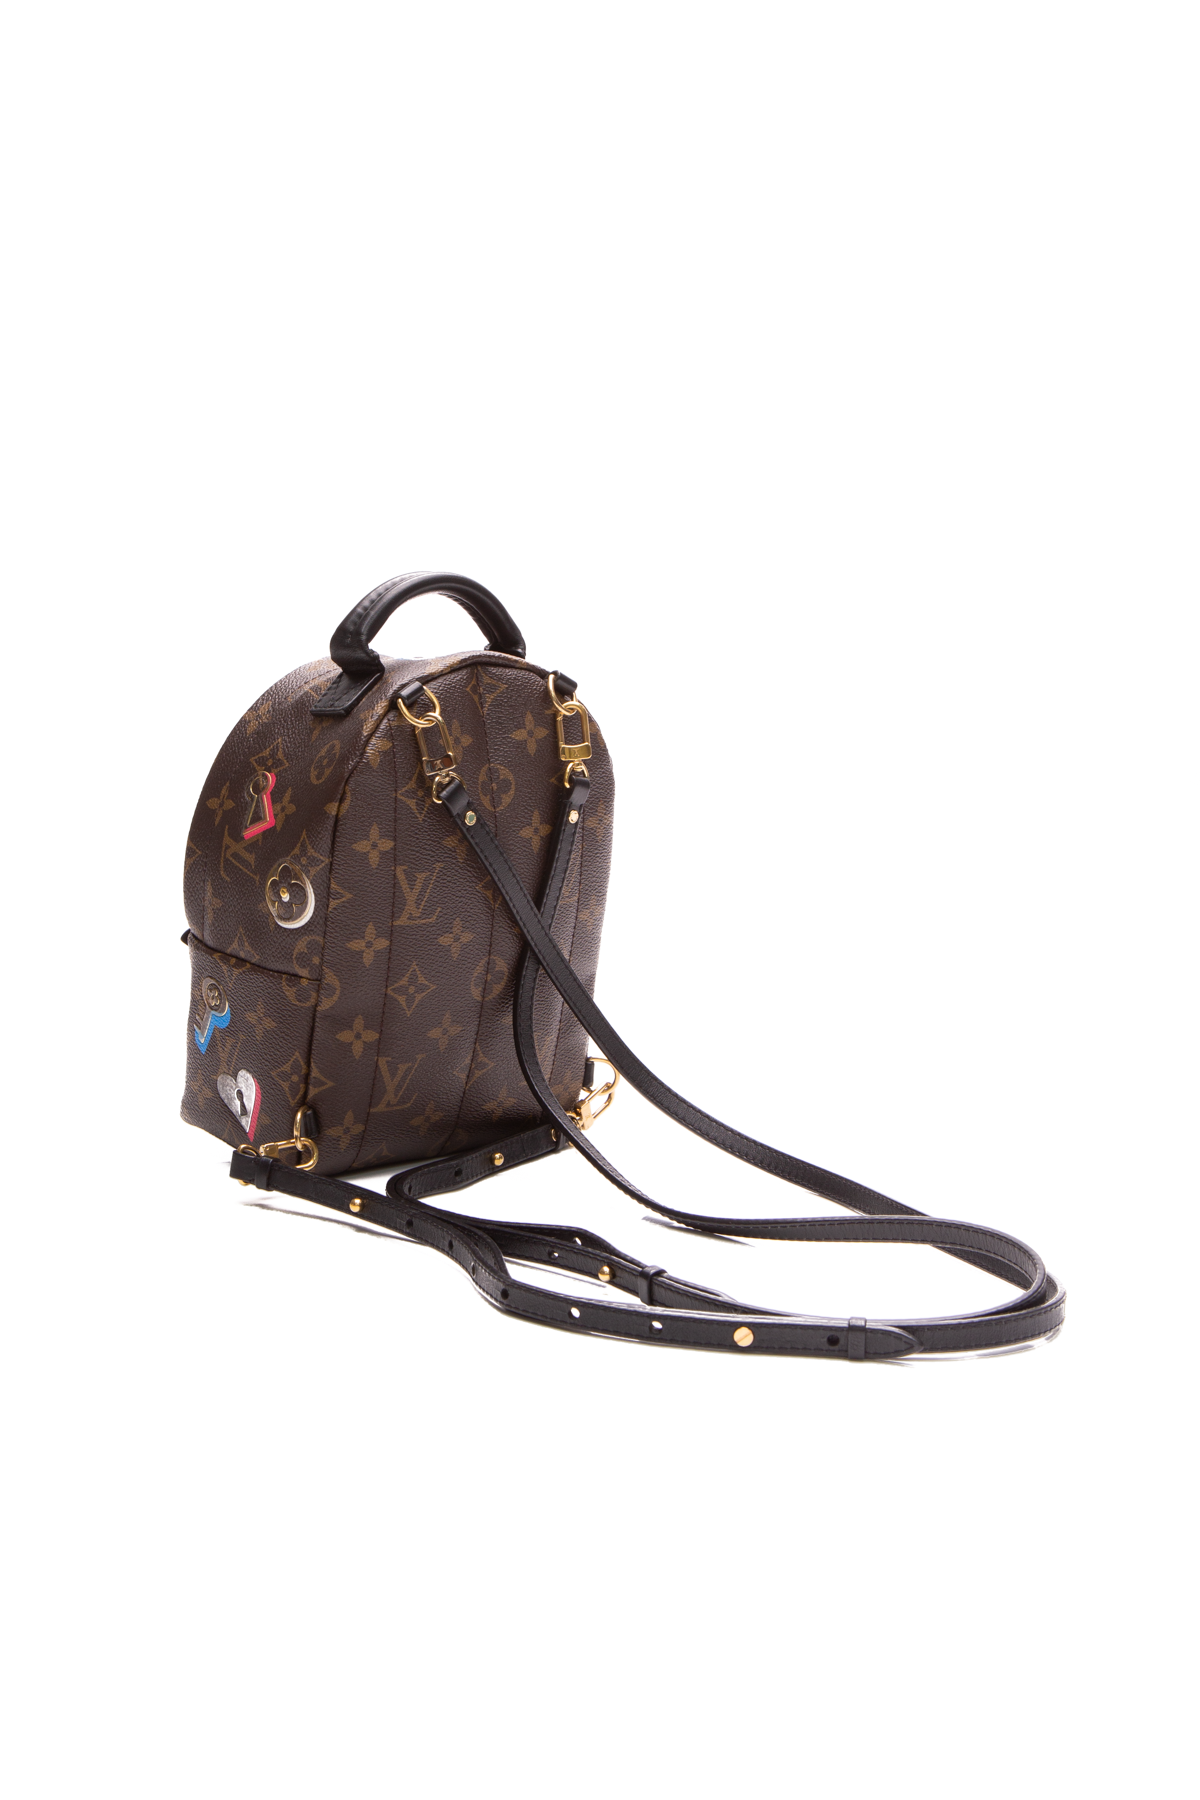 Why I'm selling my Louis Vuitton Palm Springs PM 